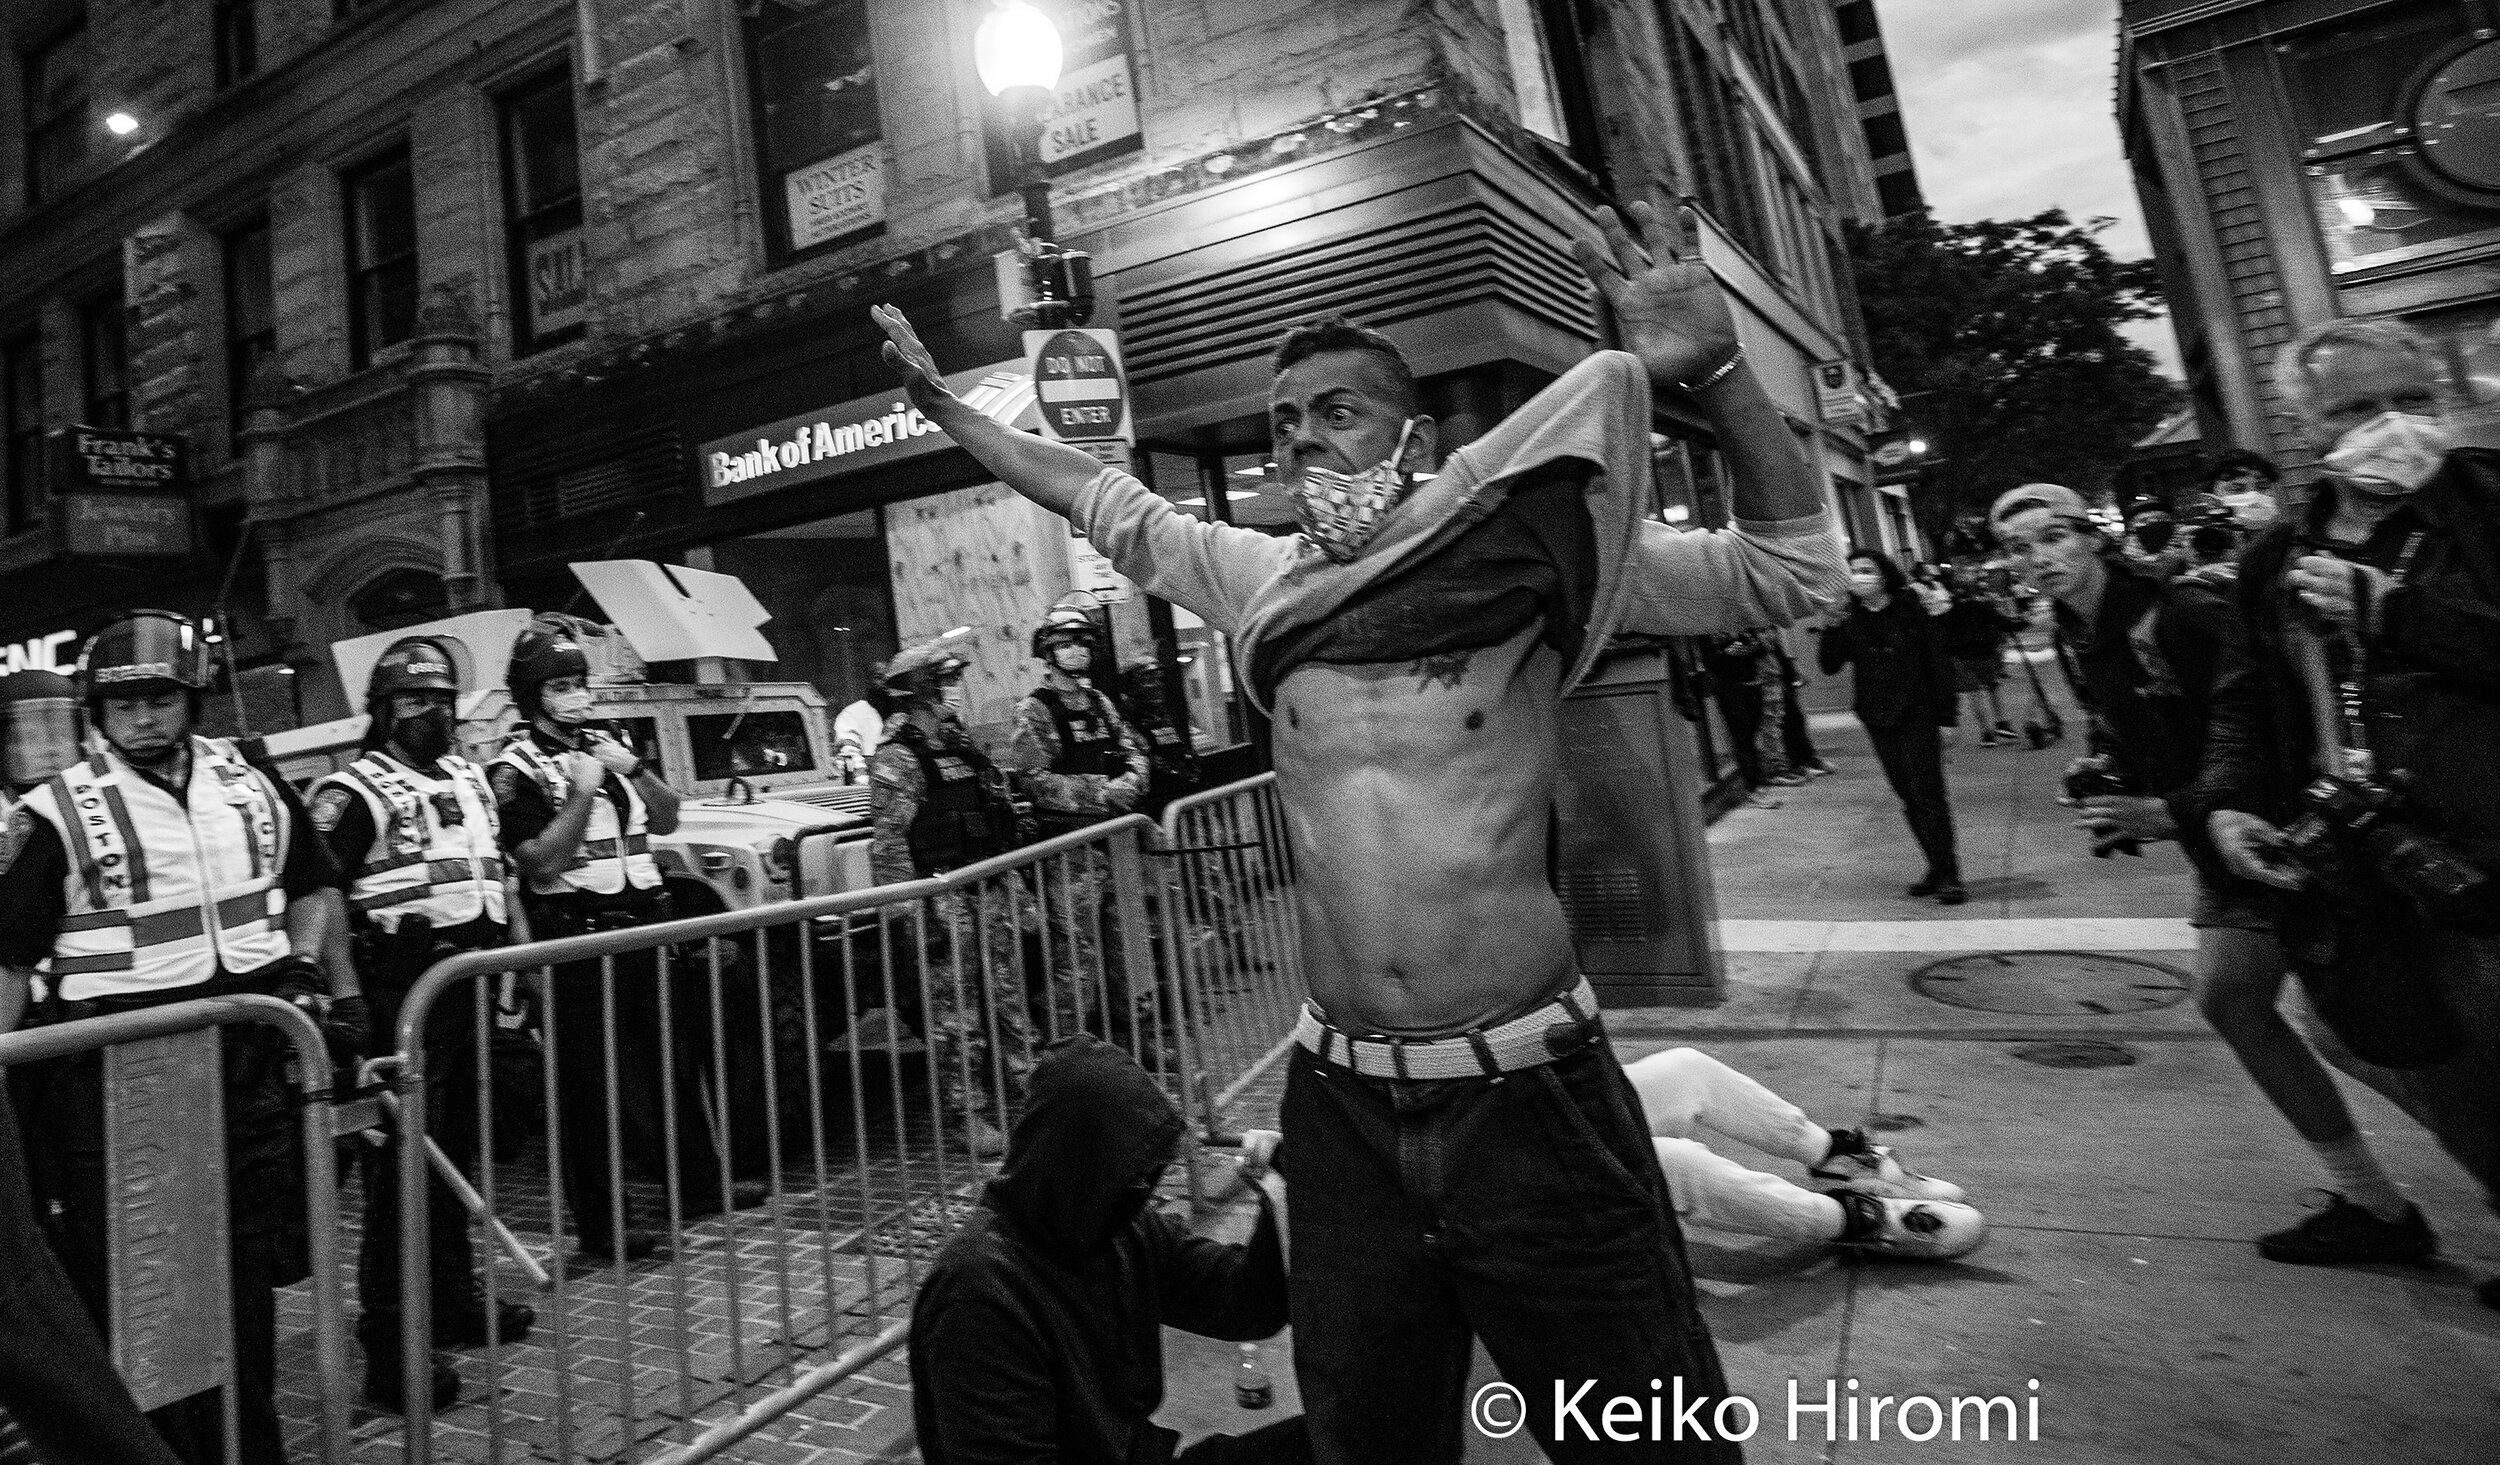  June 7, 2020, Boston, Massachusetts, USA: A protester protest blockage of street during a rally in response to deaths of George Floyd and against police brutality and racism  in Boston. 